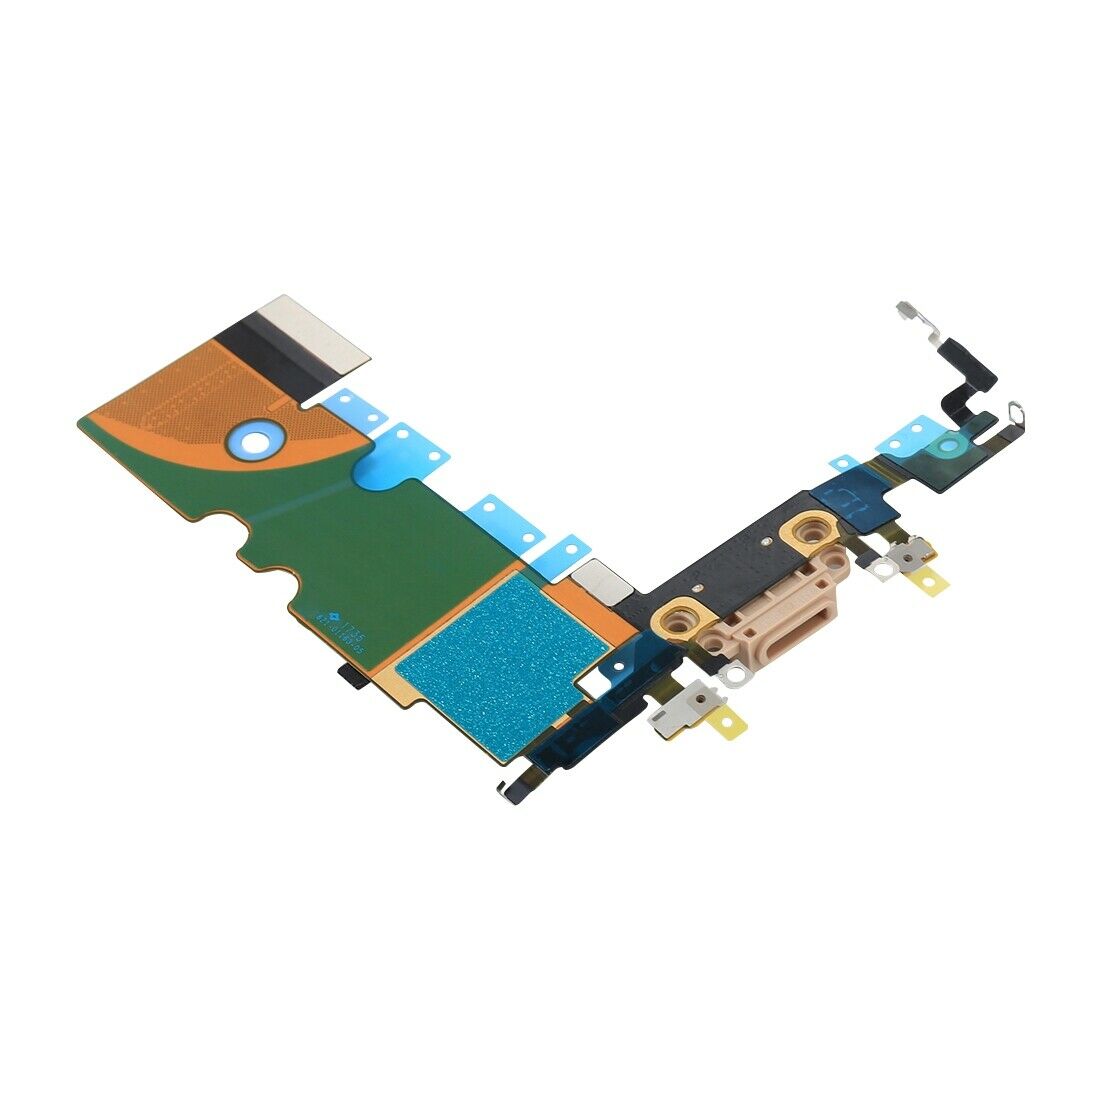 Replacement Charging Port Flex Cable For Apple iPhone SE 2nd Gen 2020 - Gold-Mobile Phone Parts-First Help Tech